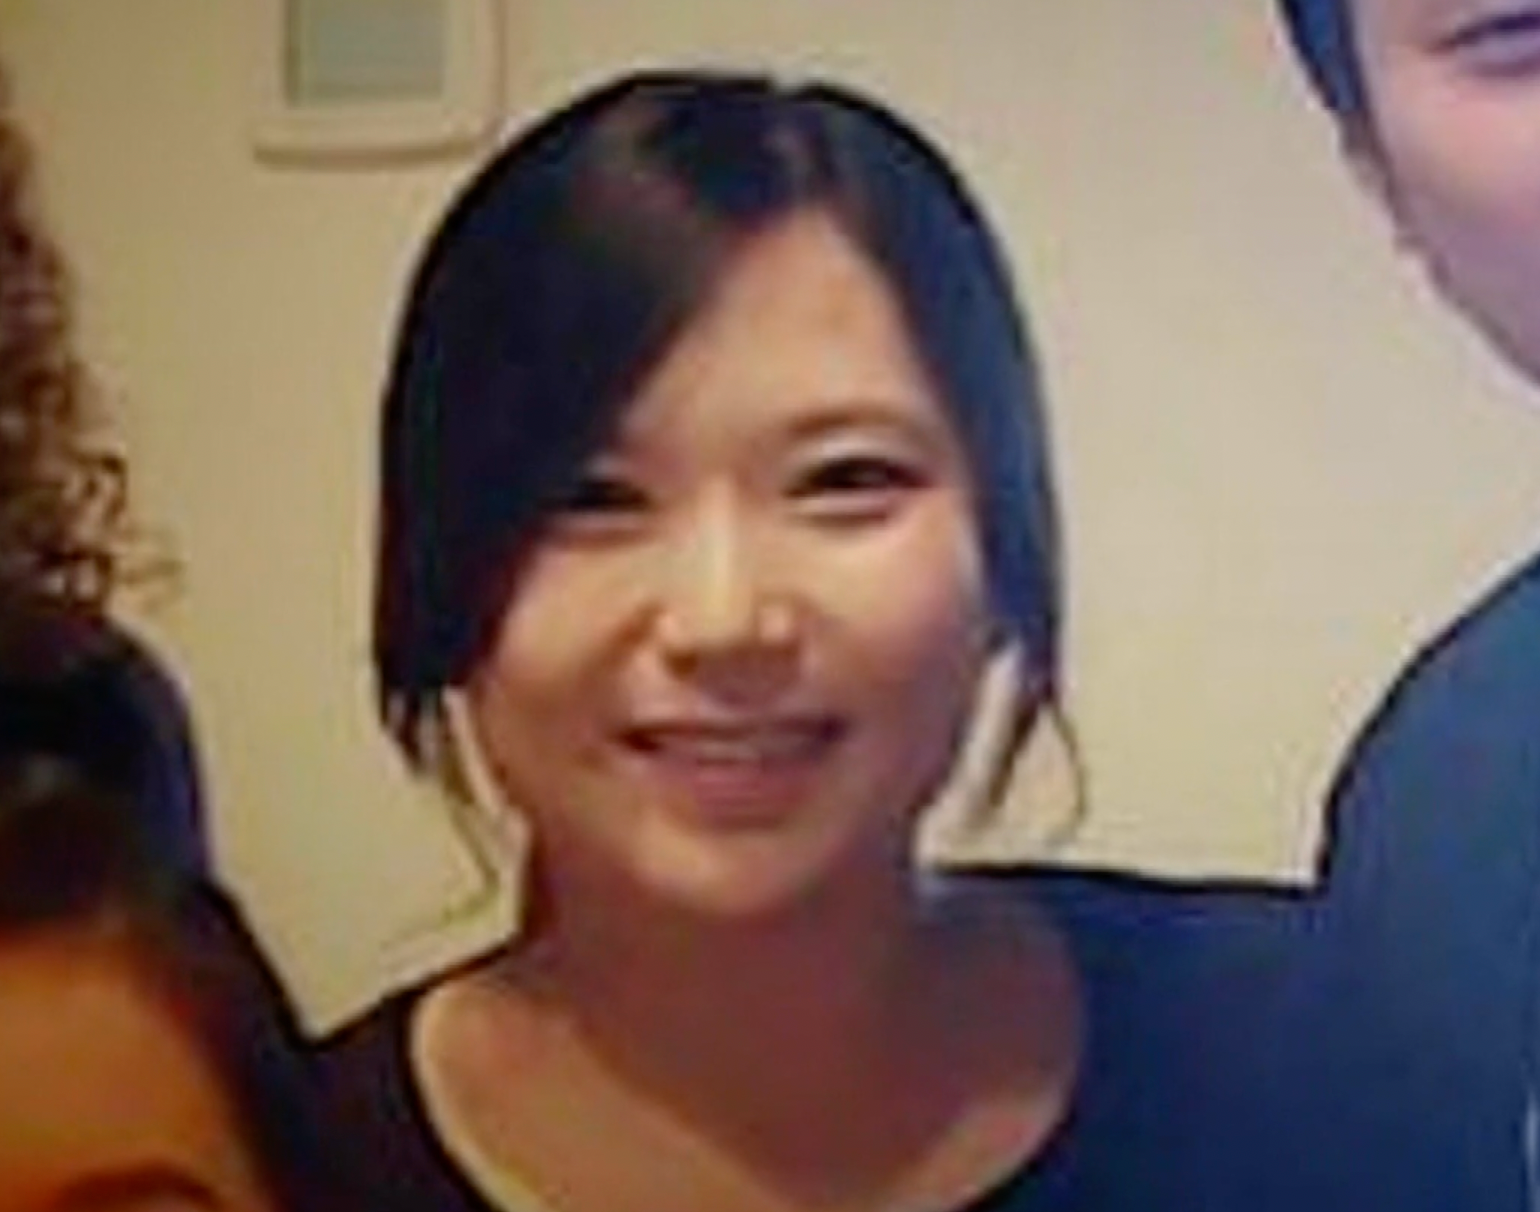 Eina Kwon, who was shot and killed at an intersection in Seattle